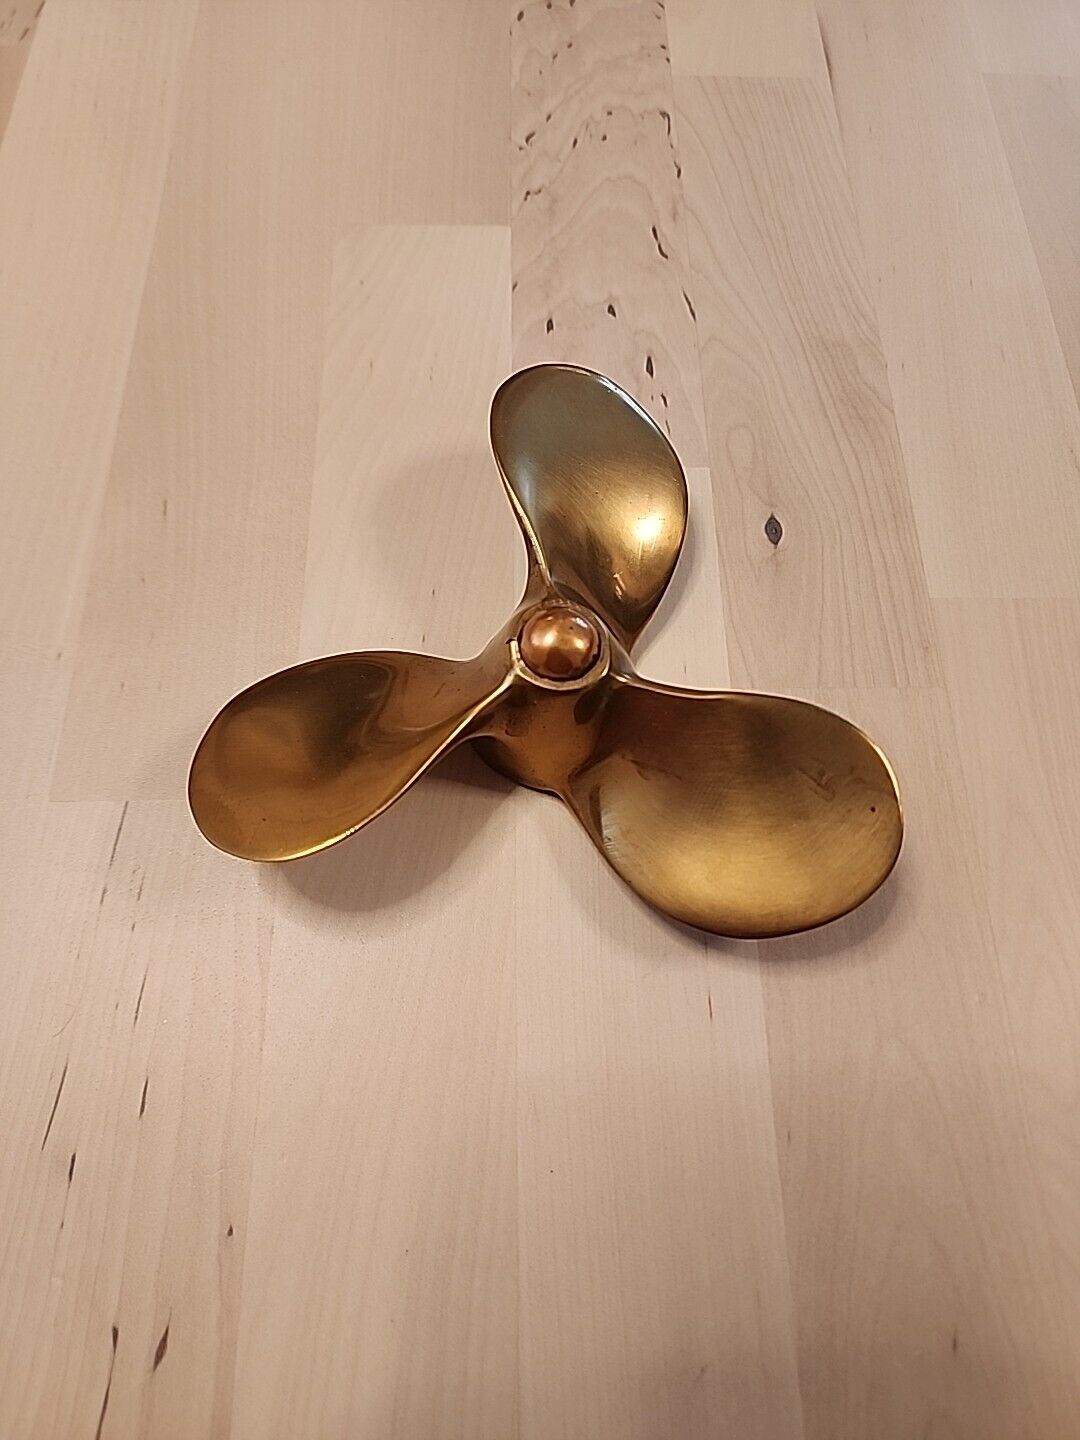 Vintage Boat Propeller Paperweight - Brass/Copper - Approximately 5\